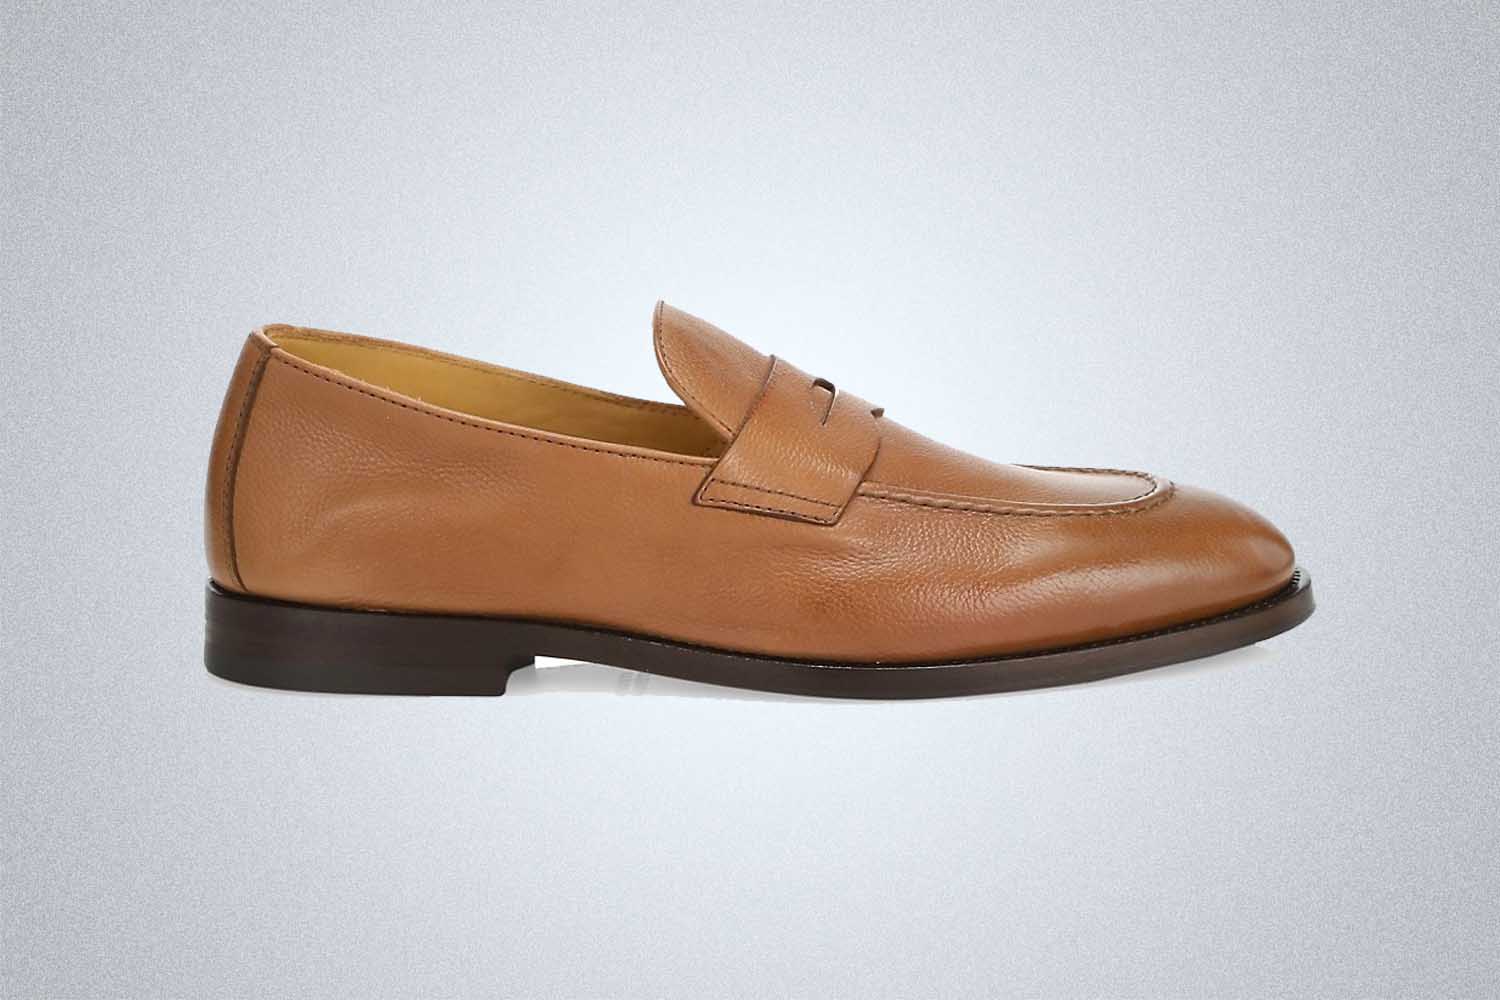 Brunello Cucinelli Leather Penny Loafers, now on sale